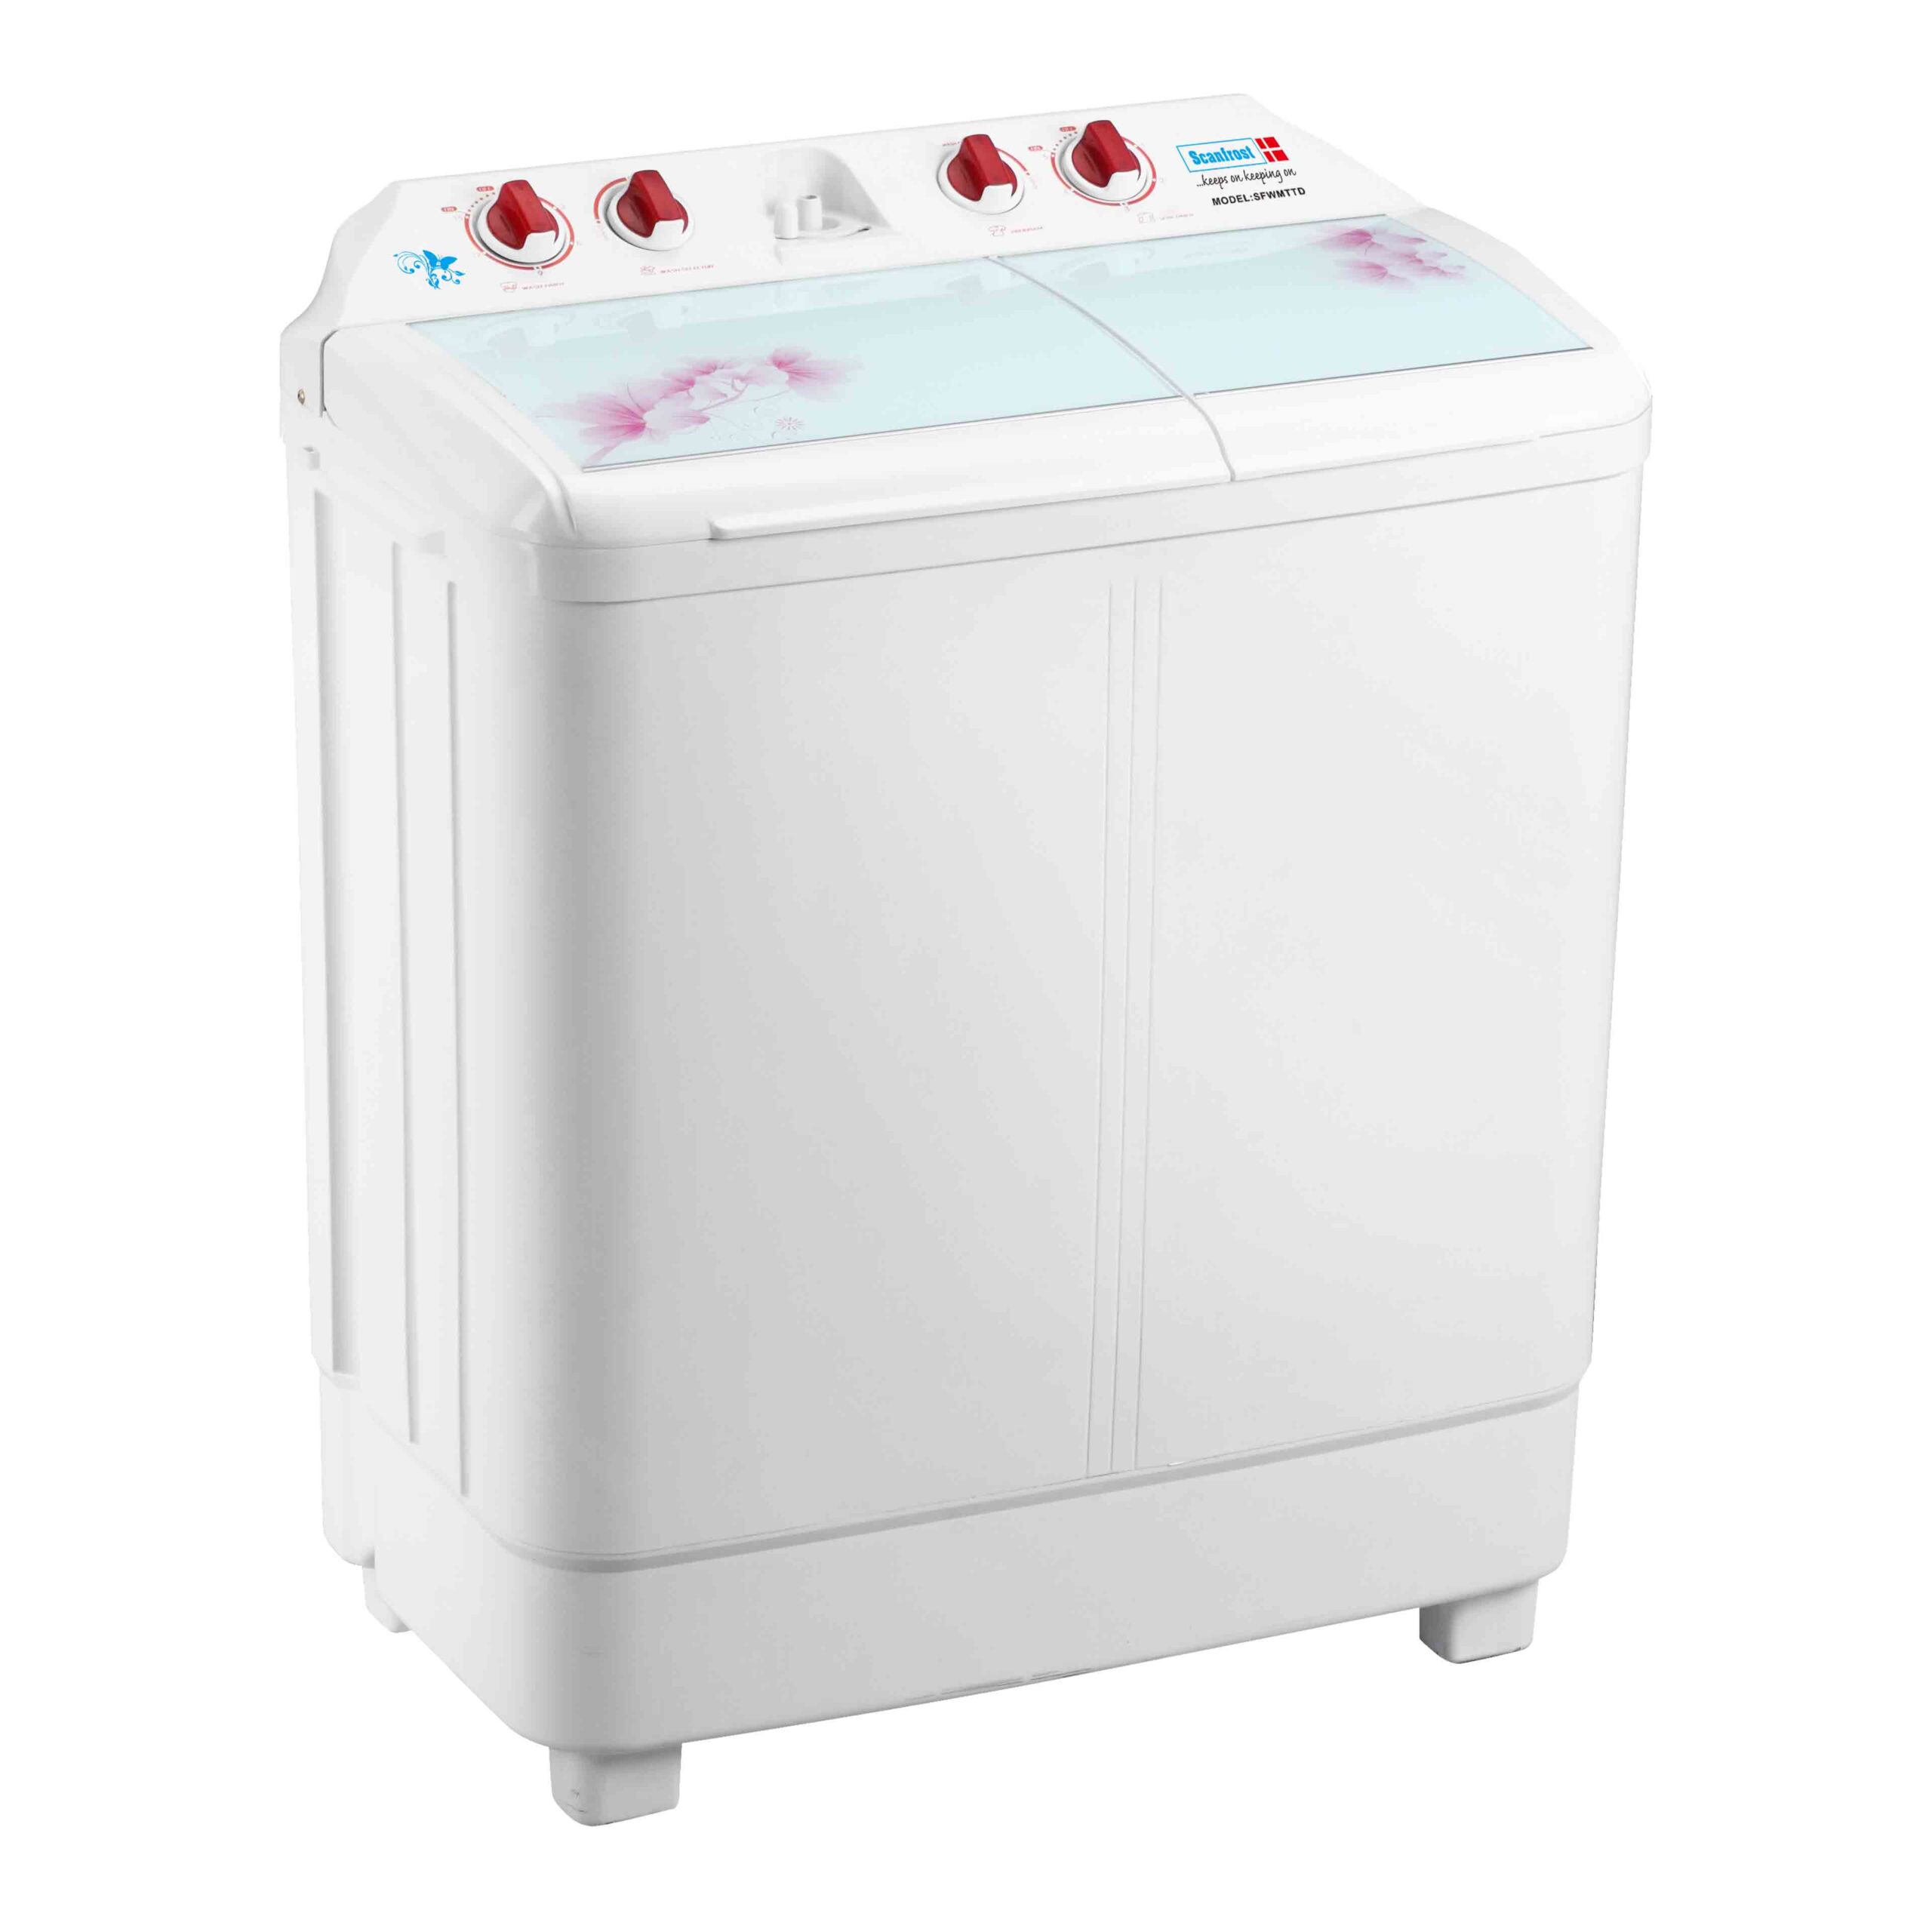 Scanfrost Semi Auto Laundry SFWMTTB 8kg Twin Tub Semi Automatic Laundry | Separate wash and Spin Drum | Plastic Body